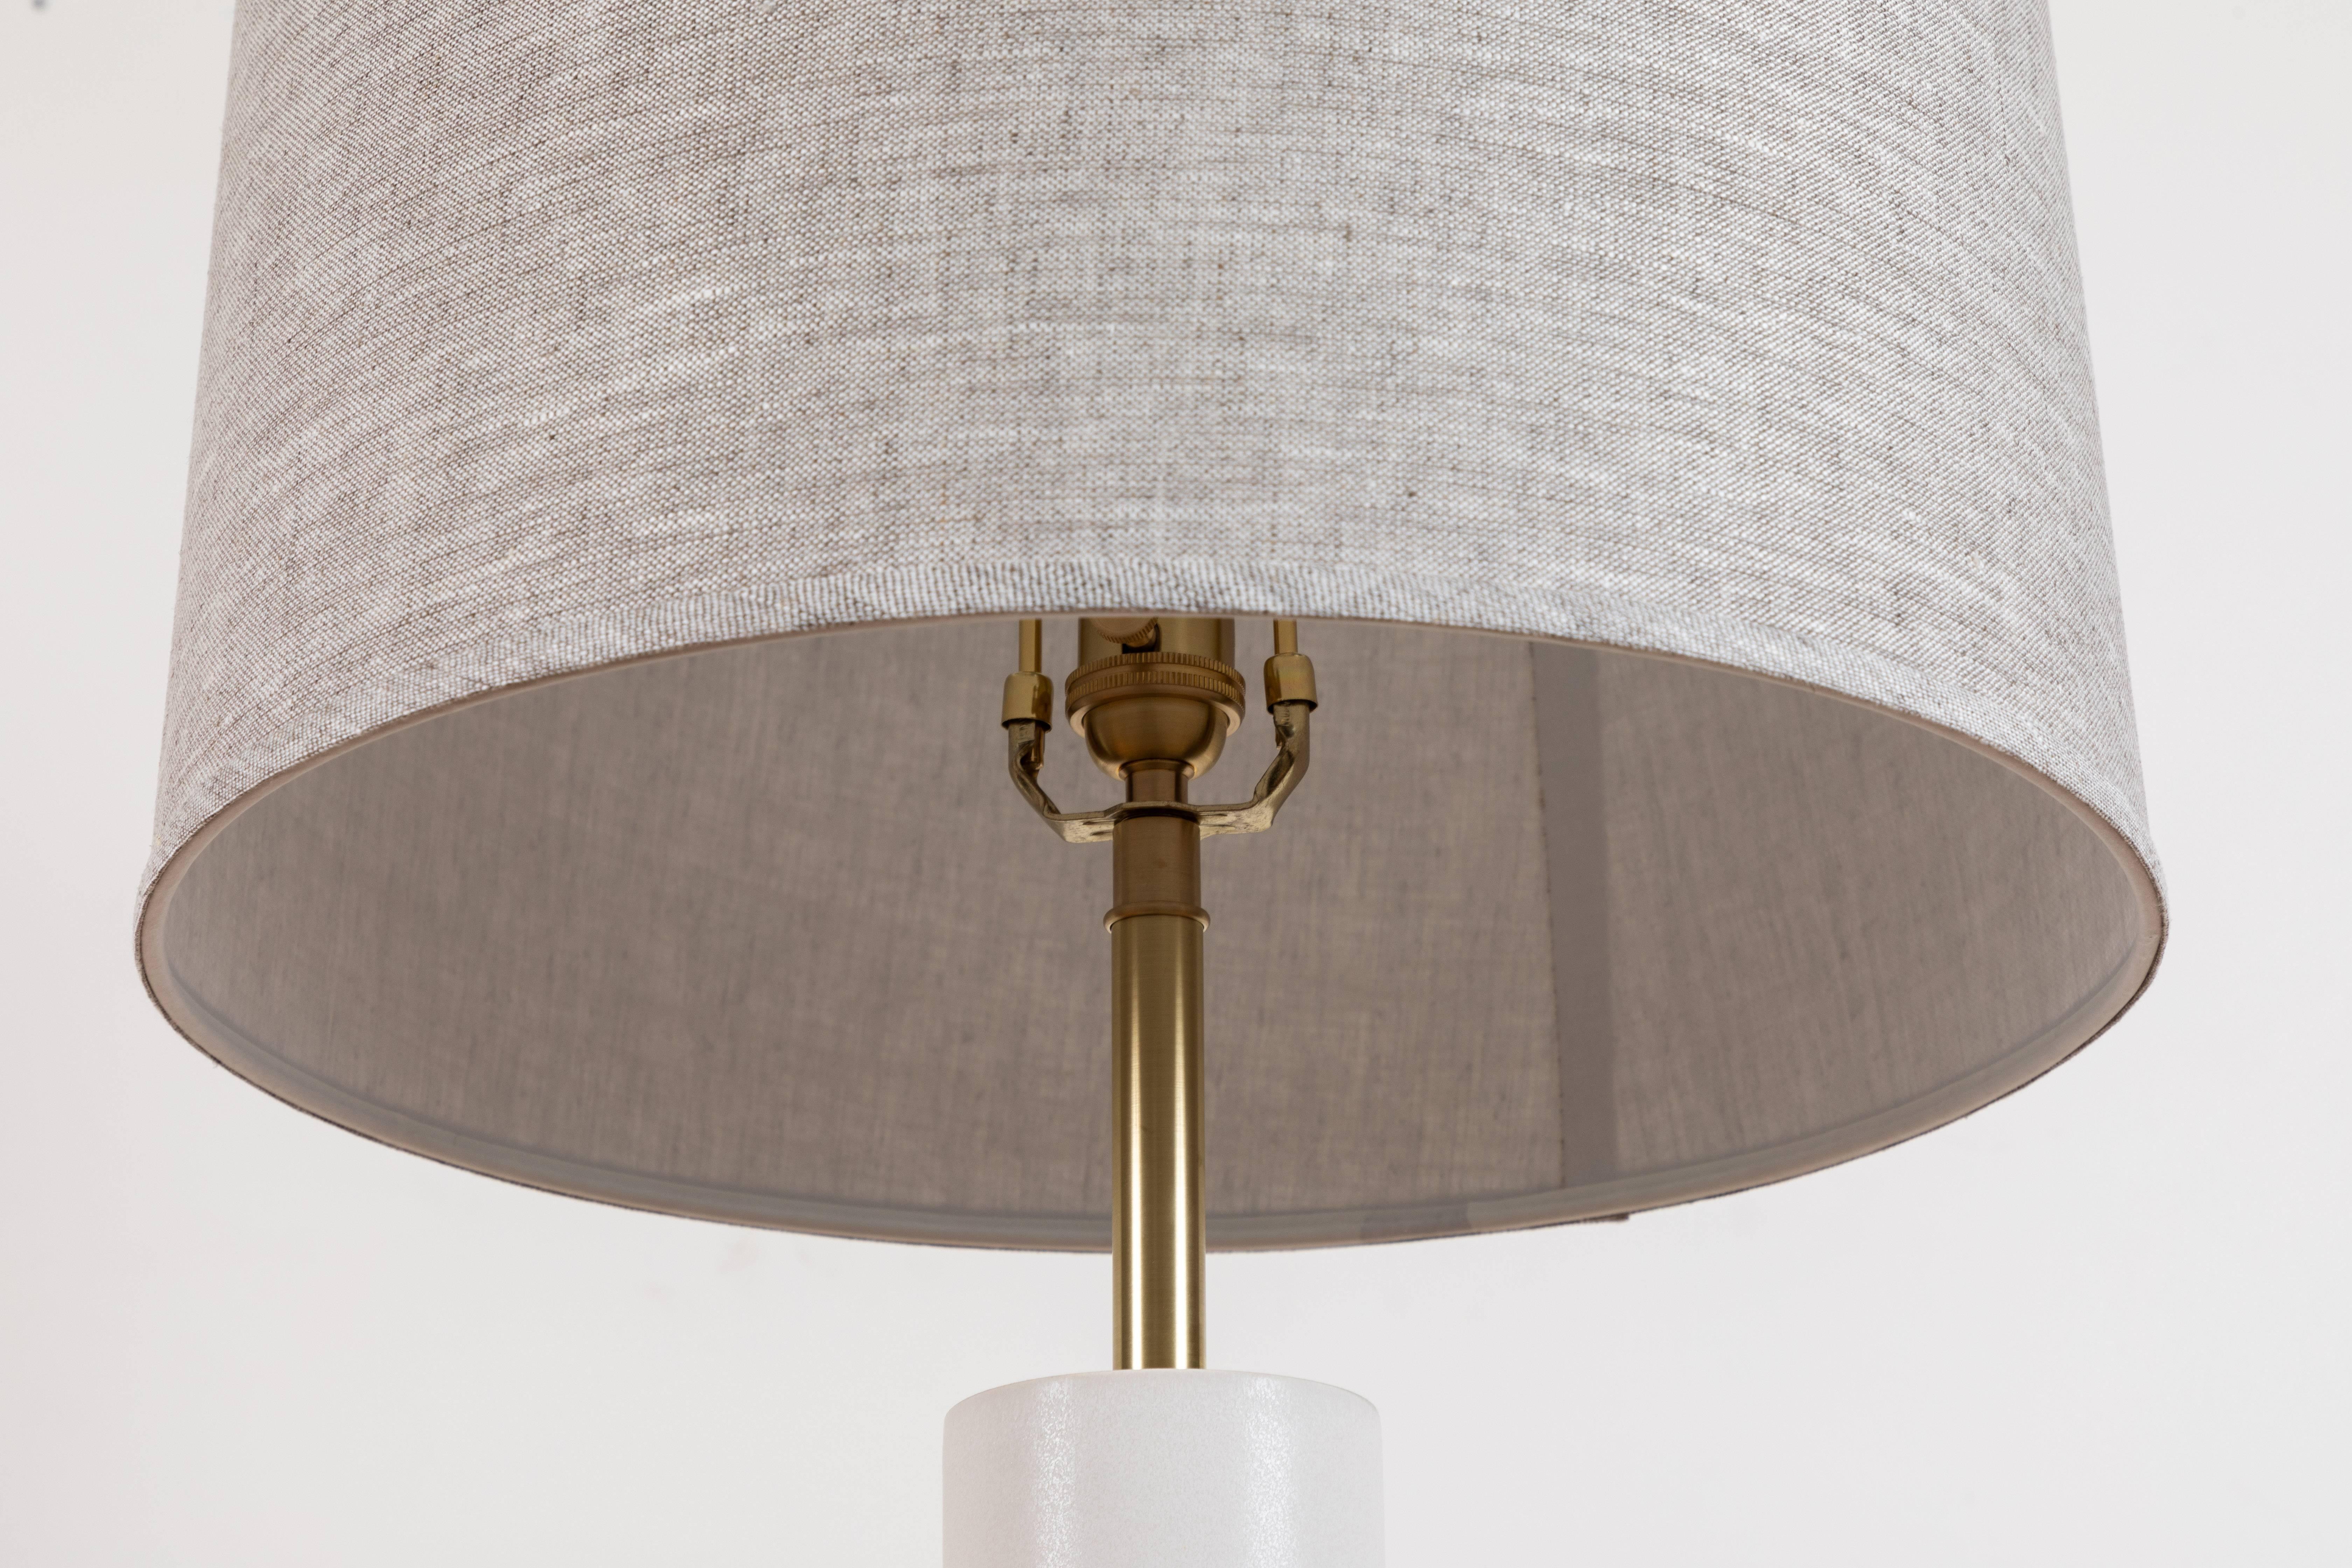 American Pair of Bauer Lamps by Stone and Sawyer for Lawson-Fenning